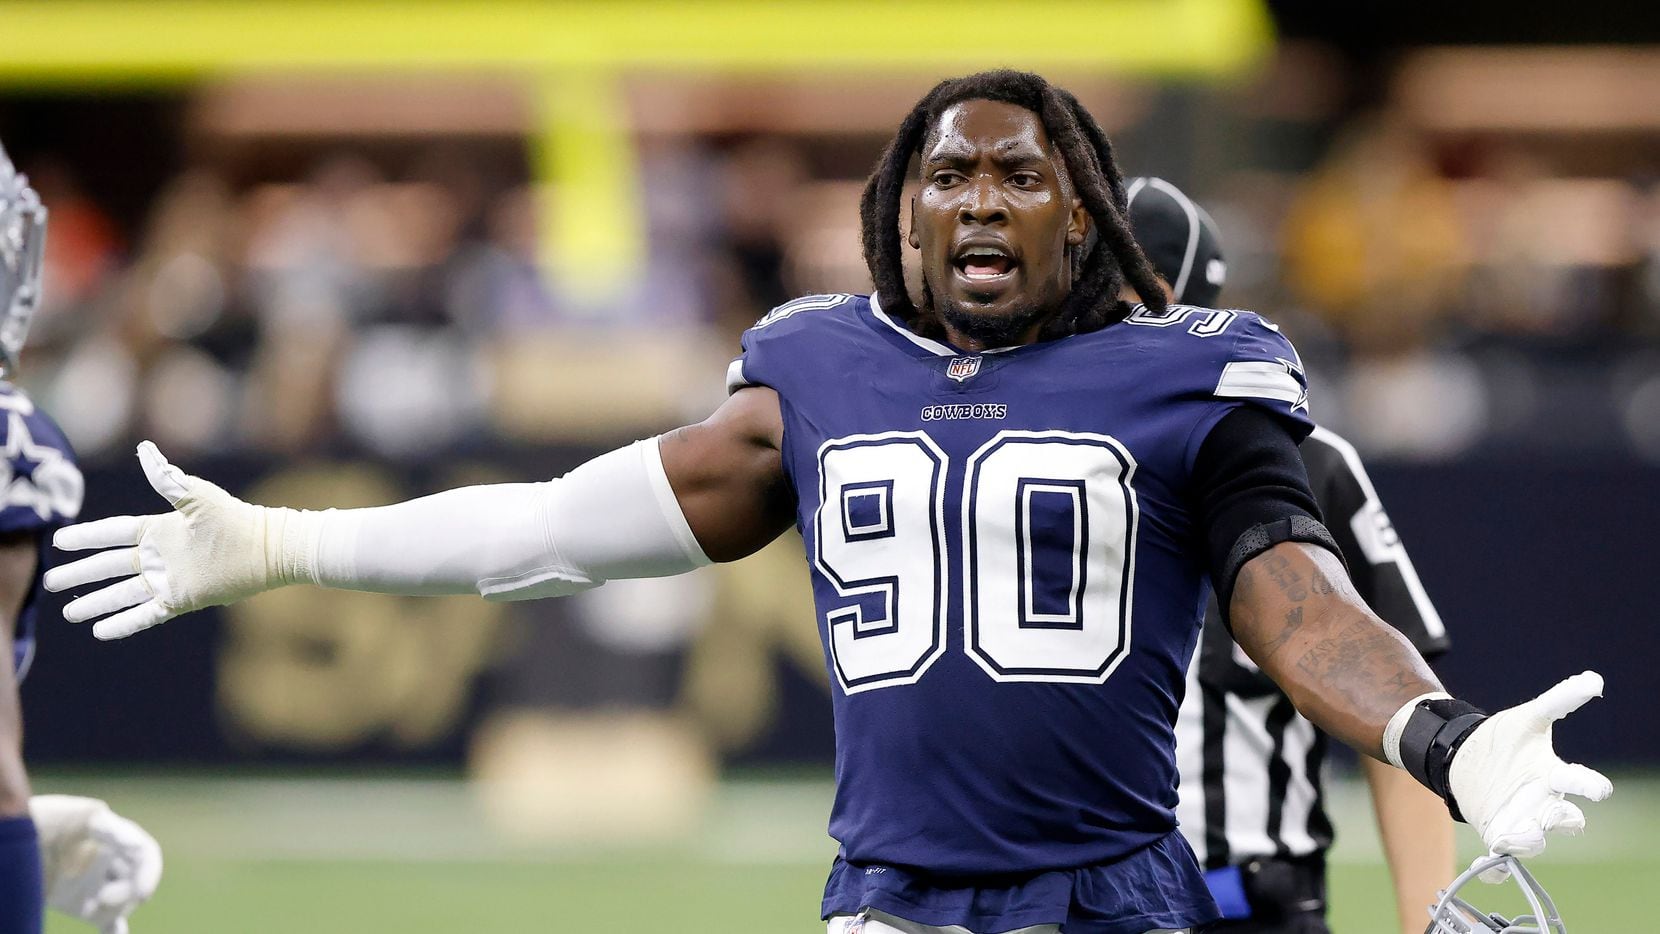 Dallas Cowboys defensive end Demarcus Lawrence (90) reacts to his teammates play during a fourth quarter turnover by the New Orleans Saints at the Caesars Superdome in New Orleans, Louisiana December 2, 2021.